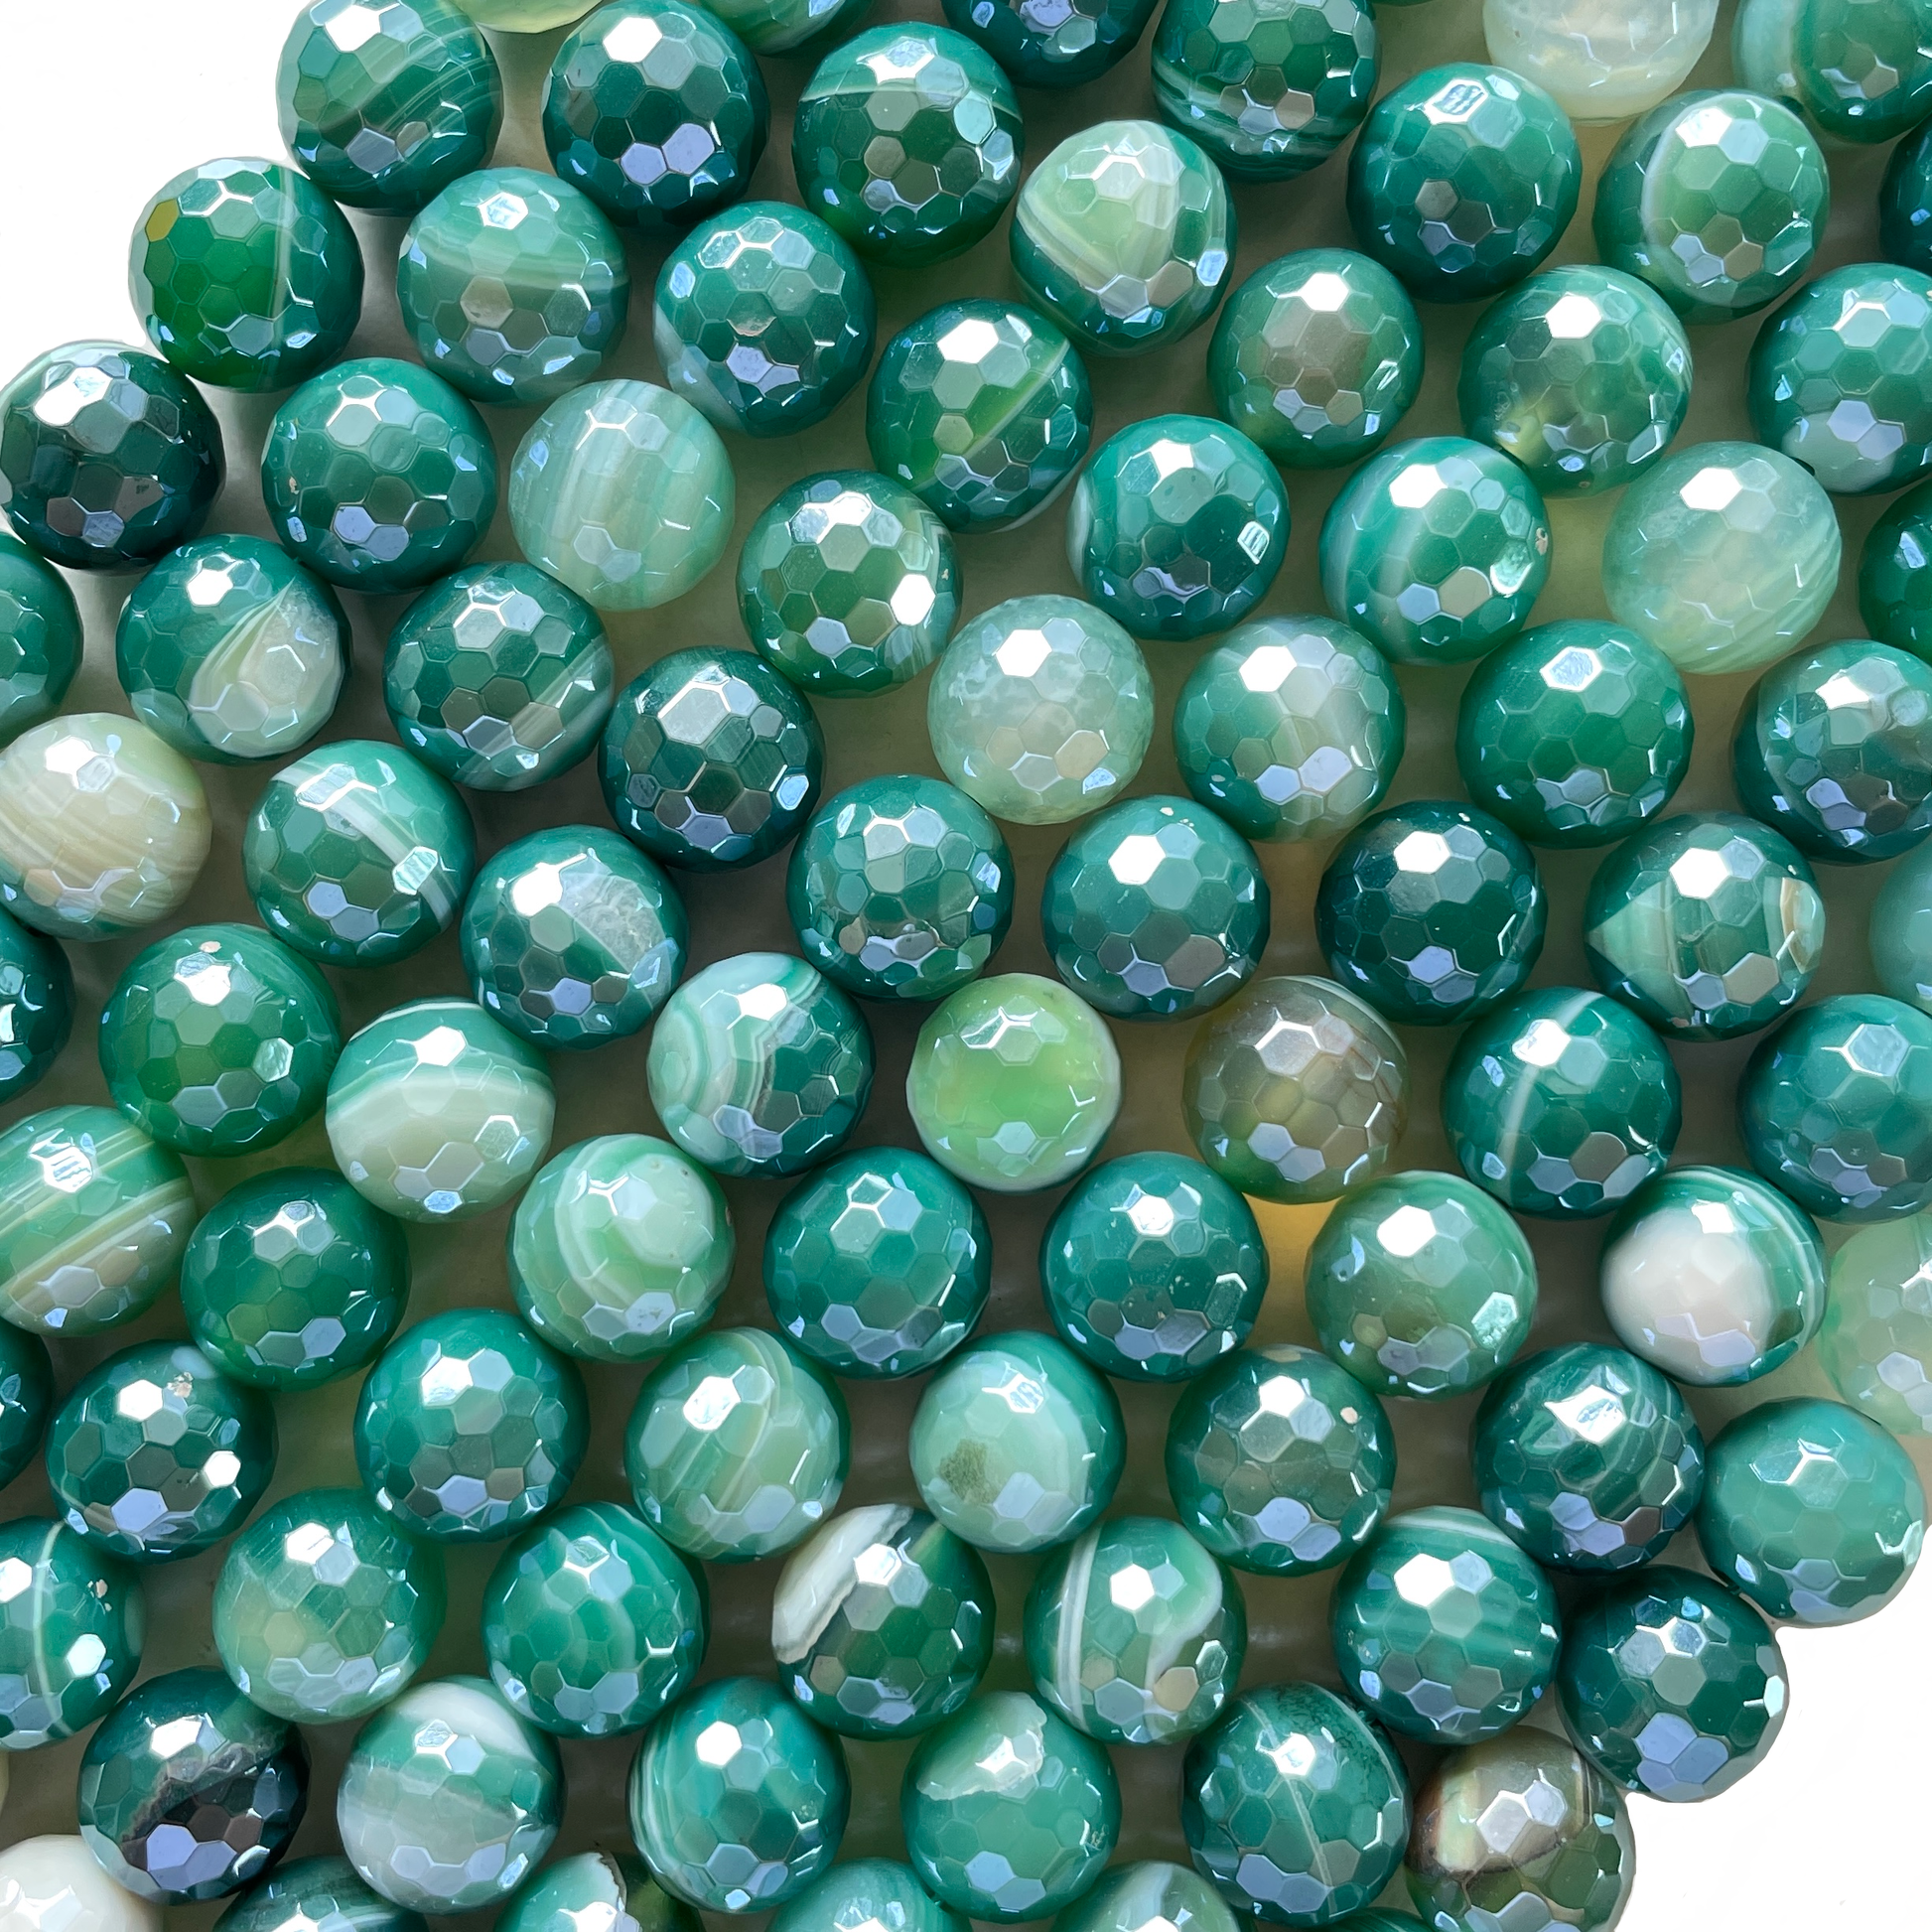 10, 12mm Electroplated Green Banded Agate Stone Faceted Beads-Grade A Premium Quality Electroplated Beads 12mm Stone Beads New Beads Arrivals Premium Quality Agate Beads Charms Beads Beyond